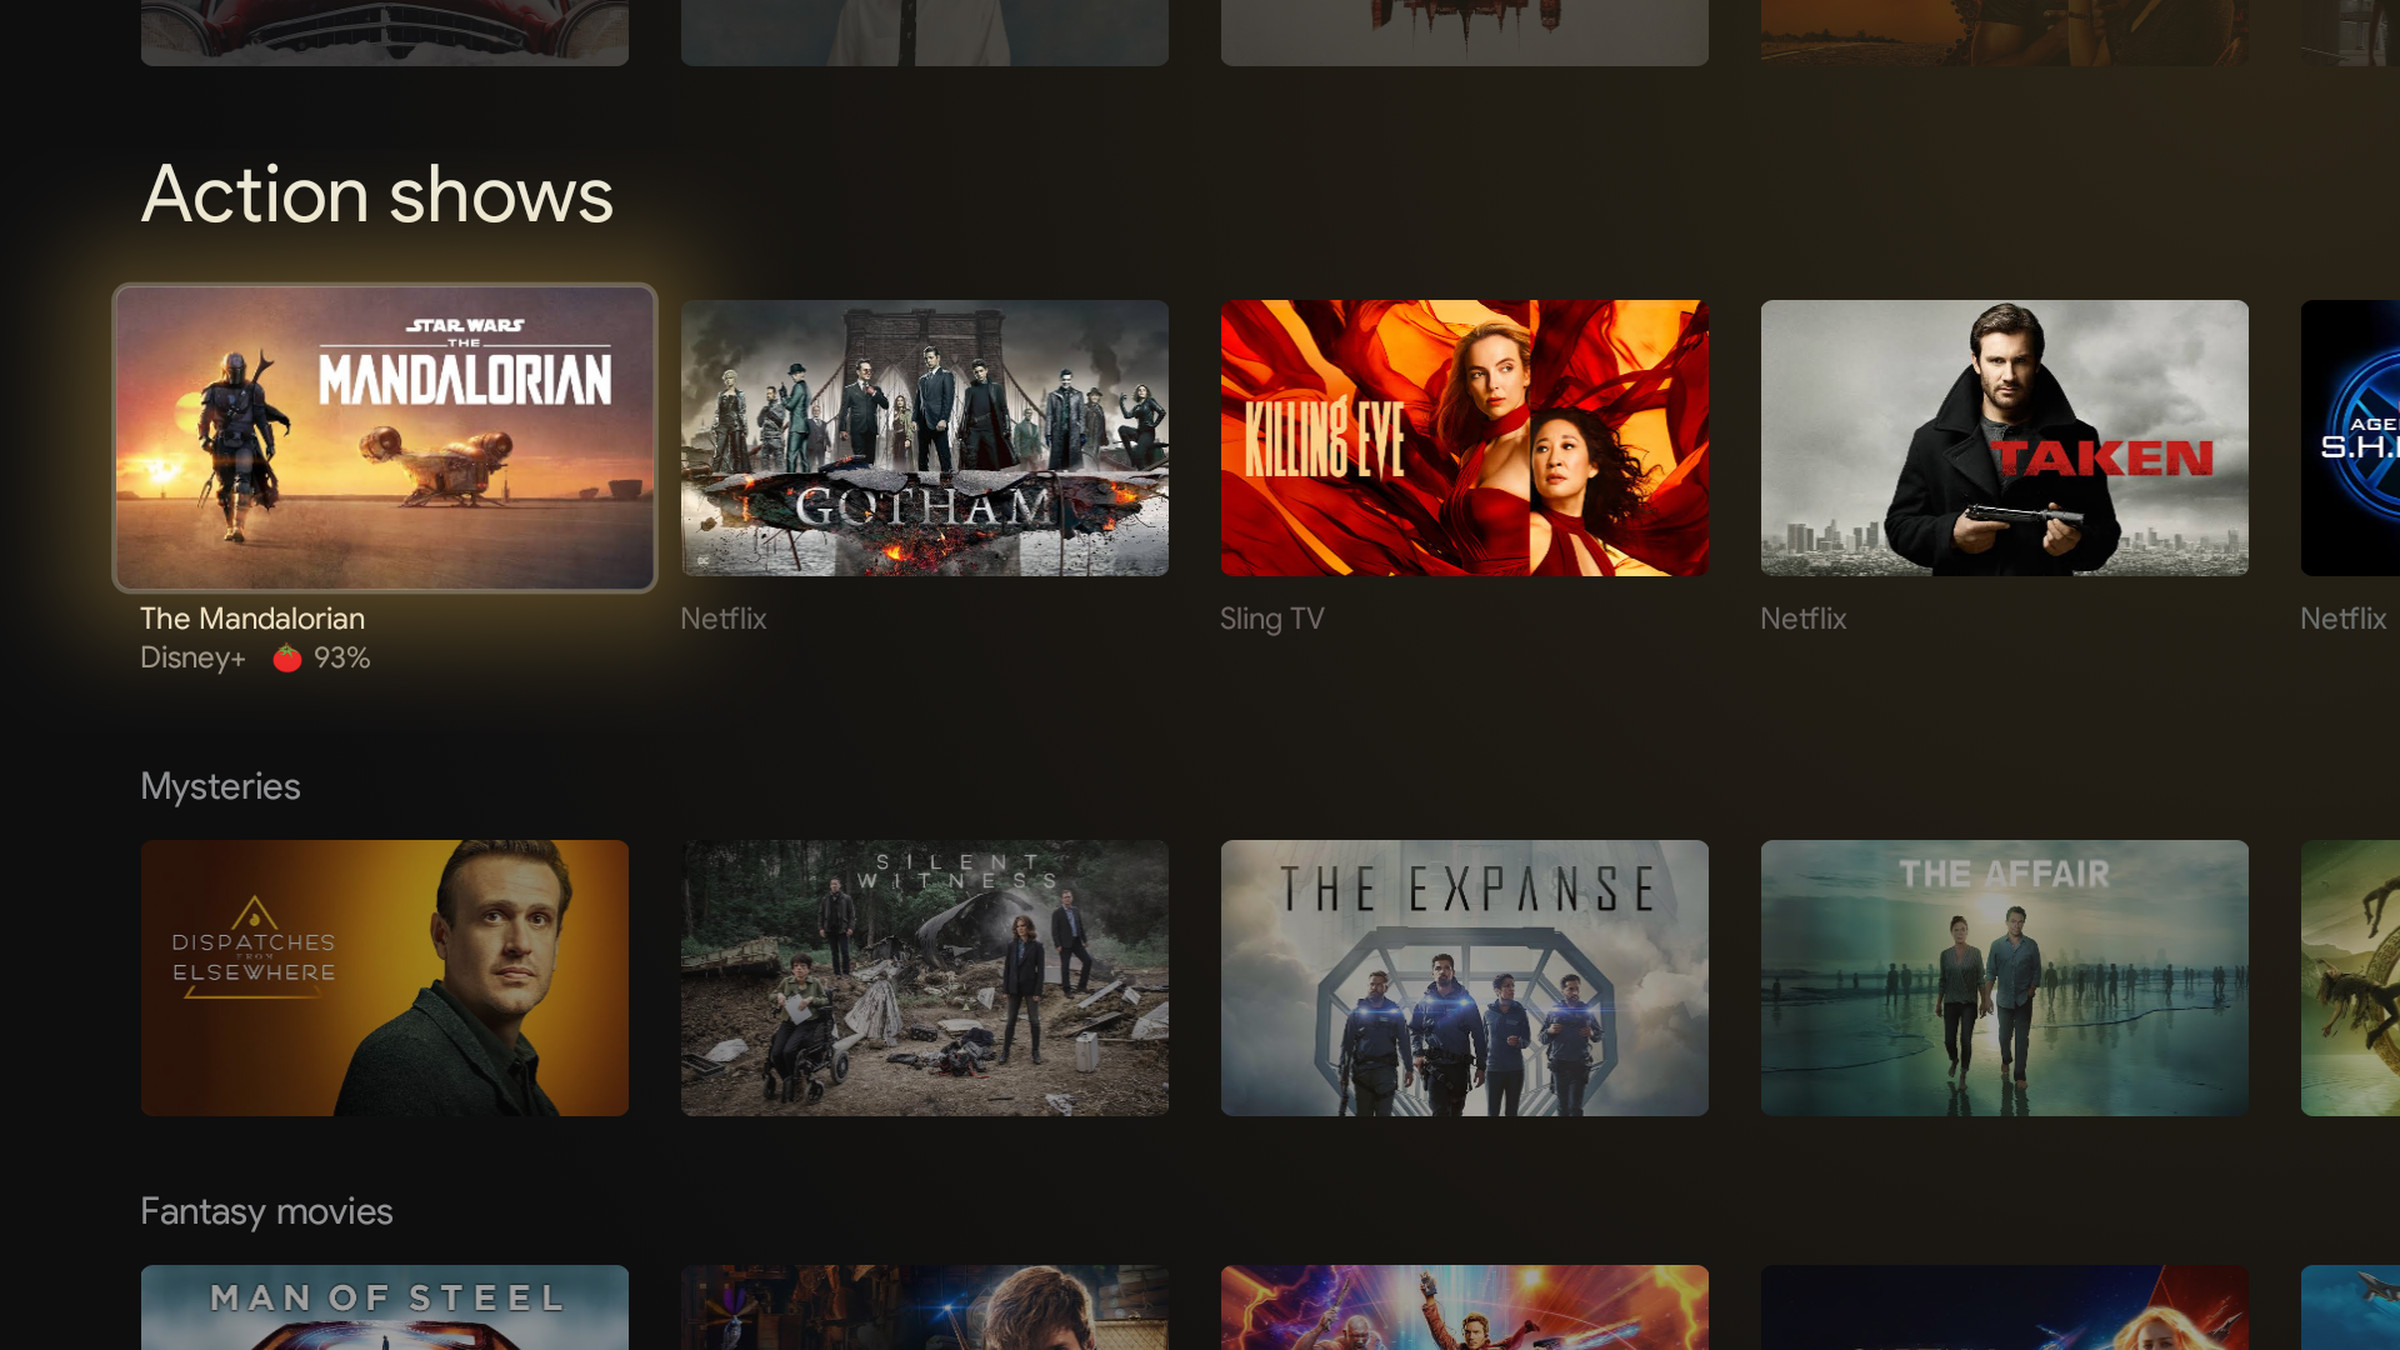 Each row on the Google TV home screen combines content from multiple streaming apps.